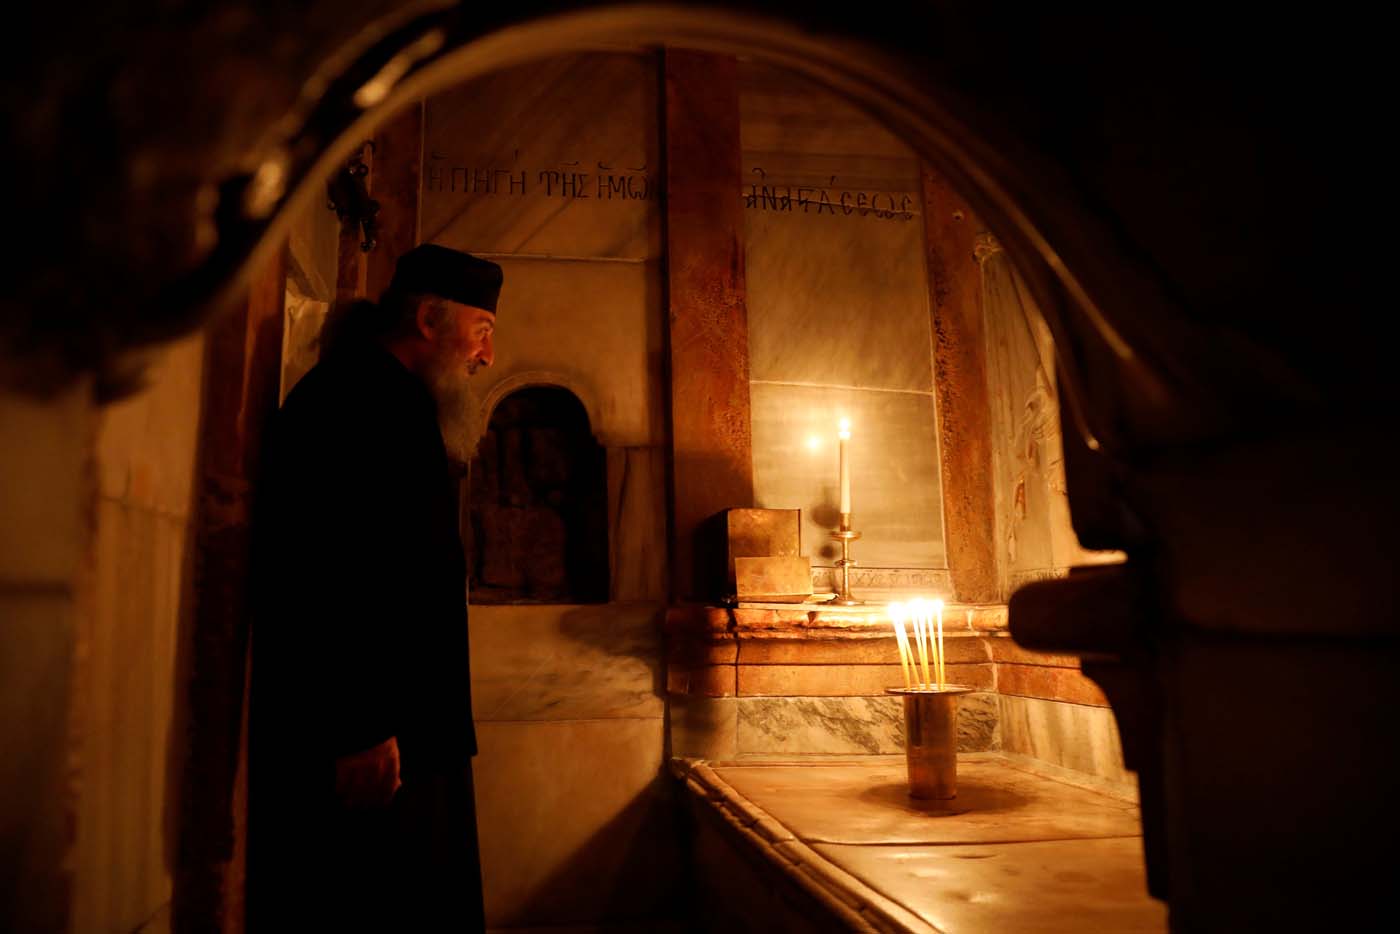 A Greek Orthodox priest stands inside the newly restored Edicule, the ancient structure housing the tomb (seen in front of him), which according to Christian belief is where Jesus's body was anointed and buried, at the Church of the Holy Sepulchre in Jerusalem's Old City March 20, 2017. REUTERS/Ronen Zvulun